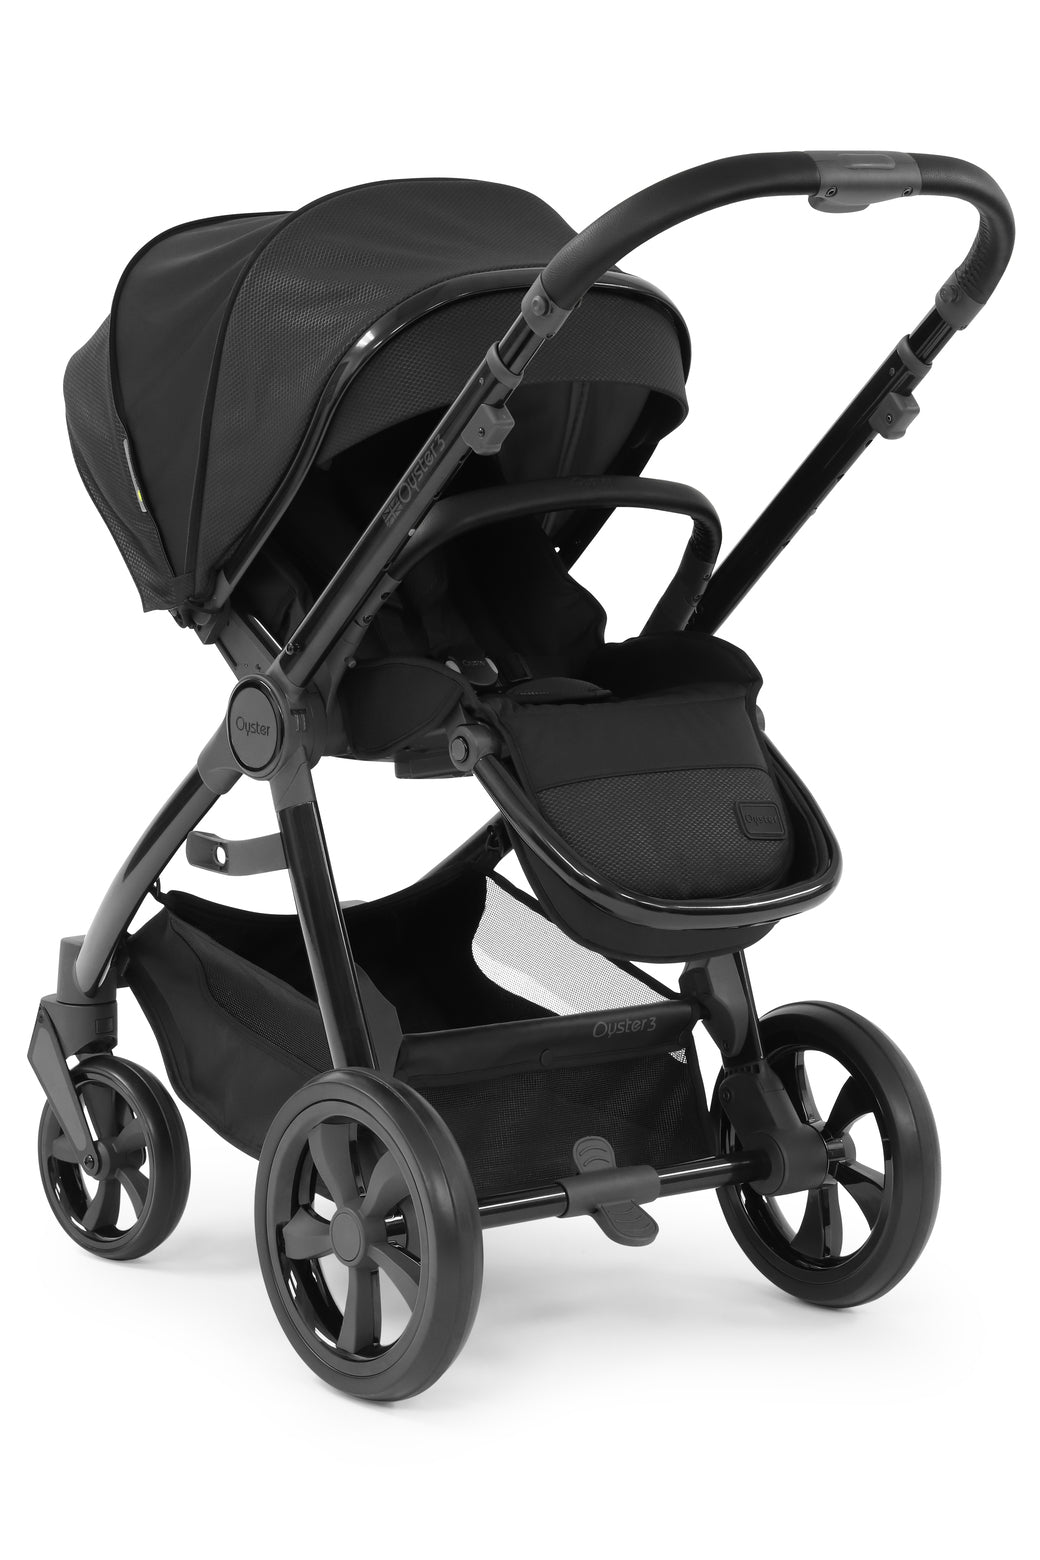 Babystyle Oyster 3 Essential 5 Piece Travel System Bundle With Cloud T - Pixel -  | For Your Little One